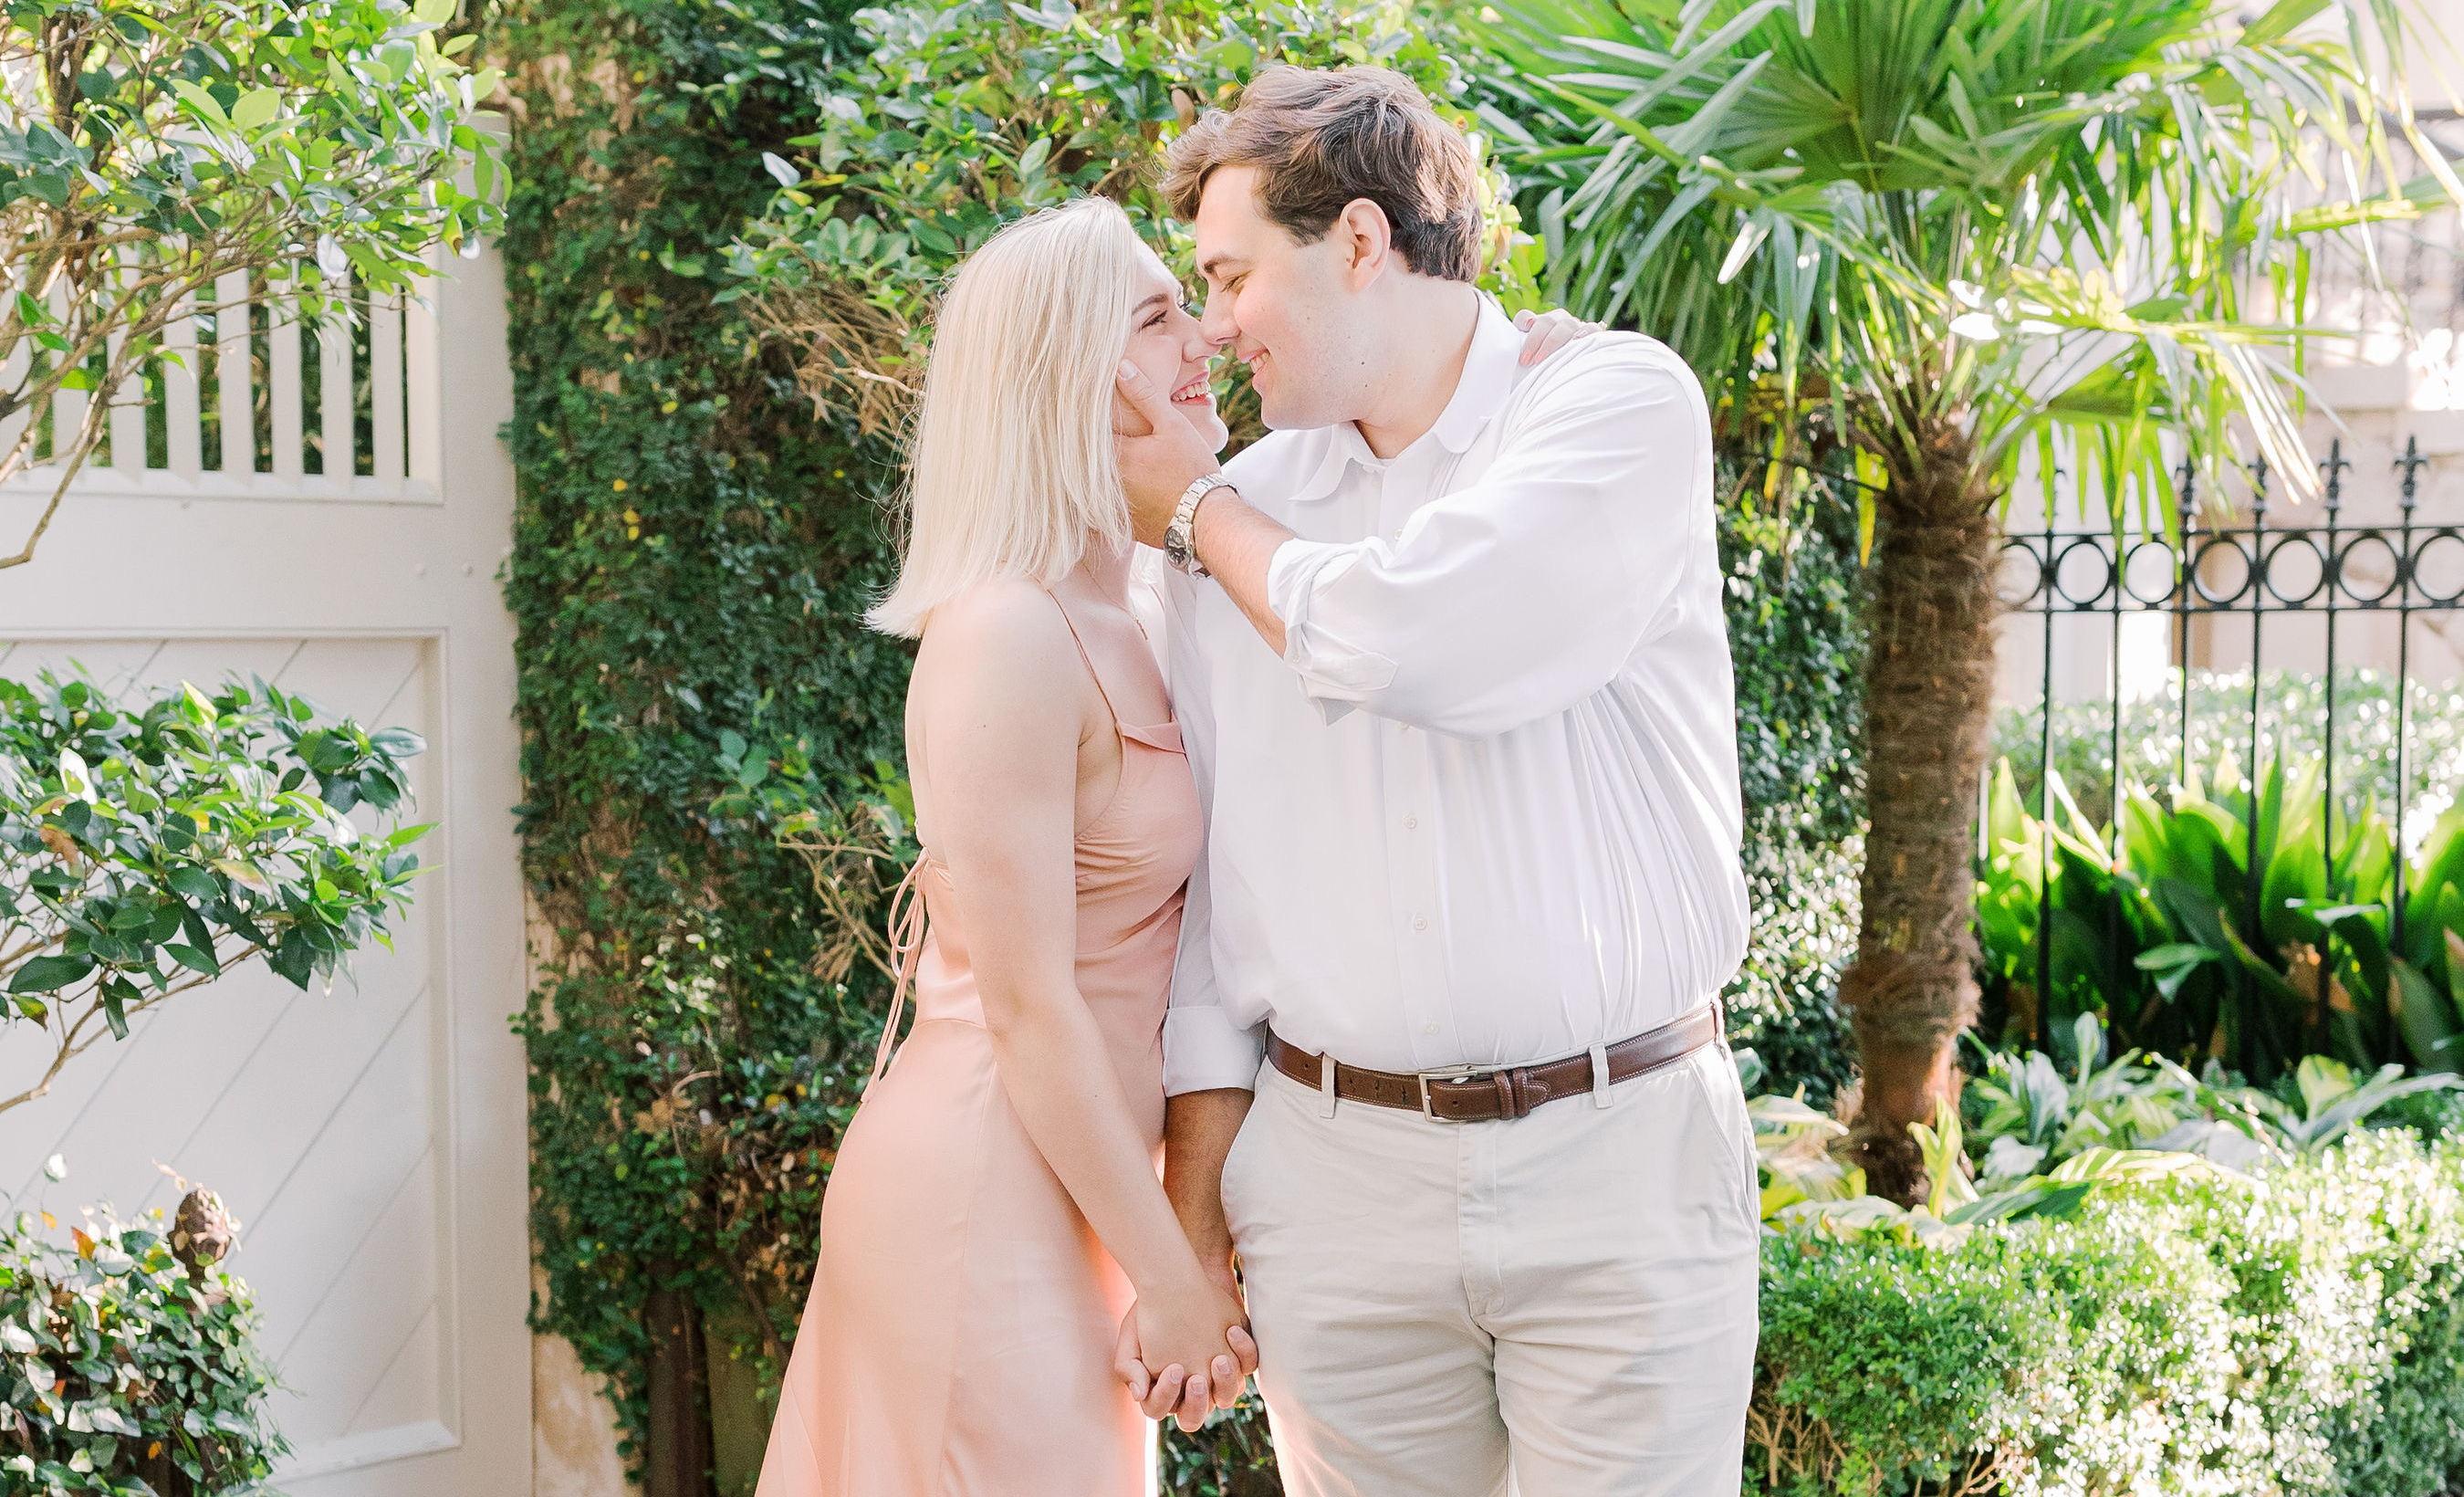 The Wedding Website of Anna Stone and Will DeFilippis